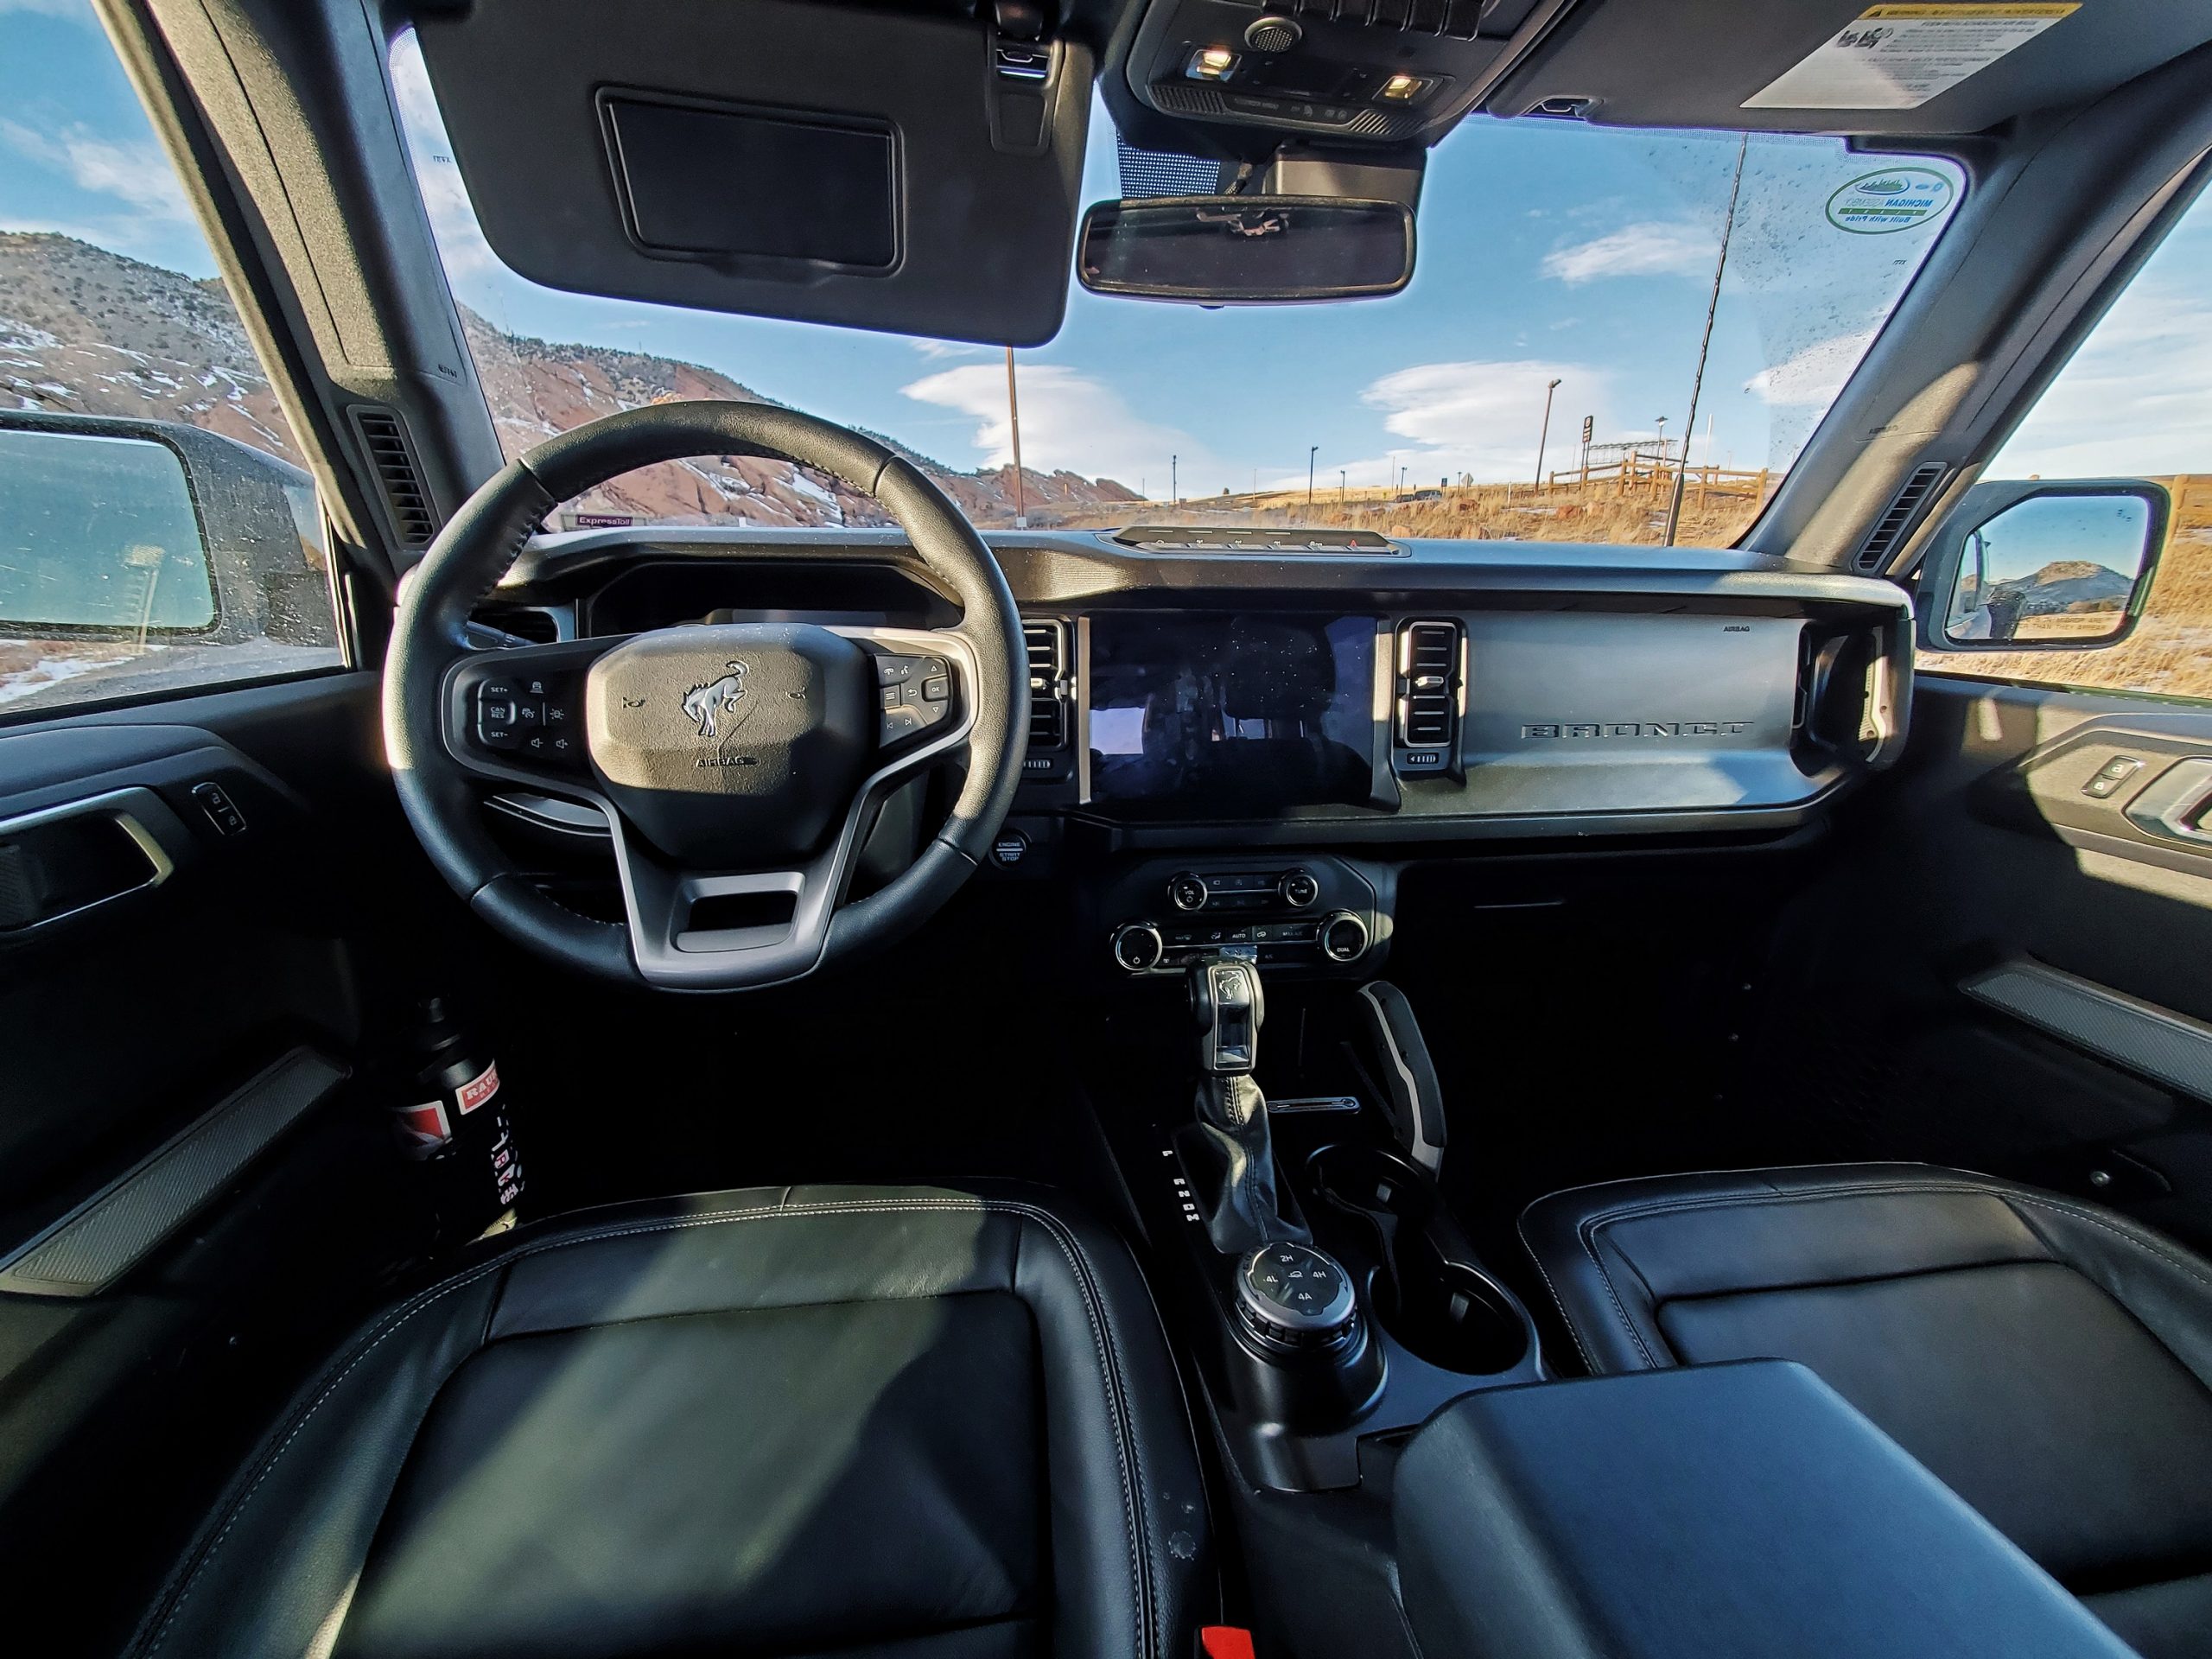 The interior of the 2022 Ford Bronco shot from the driver's seat